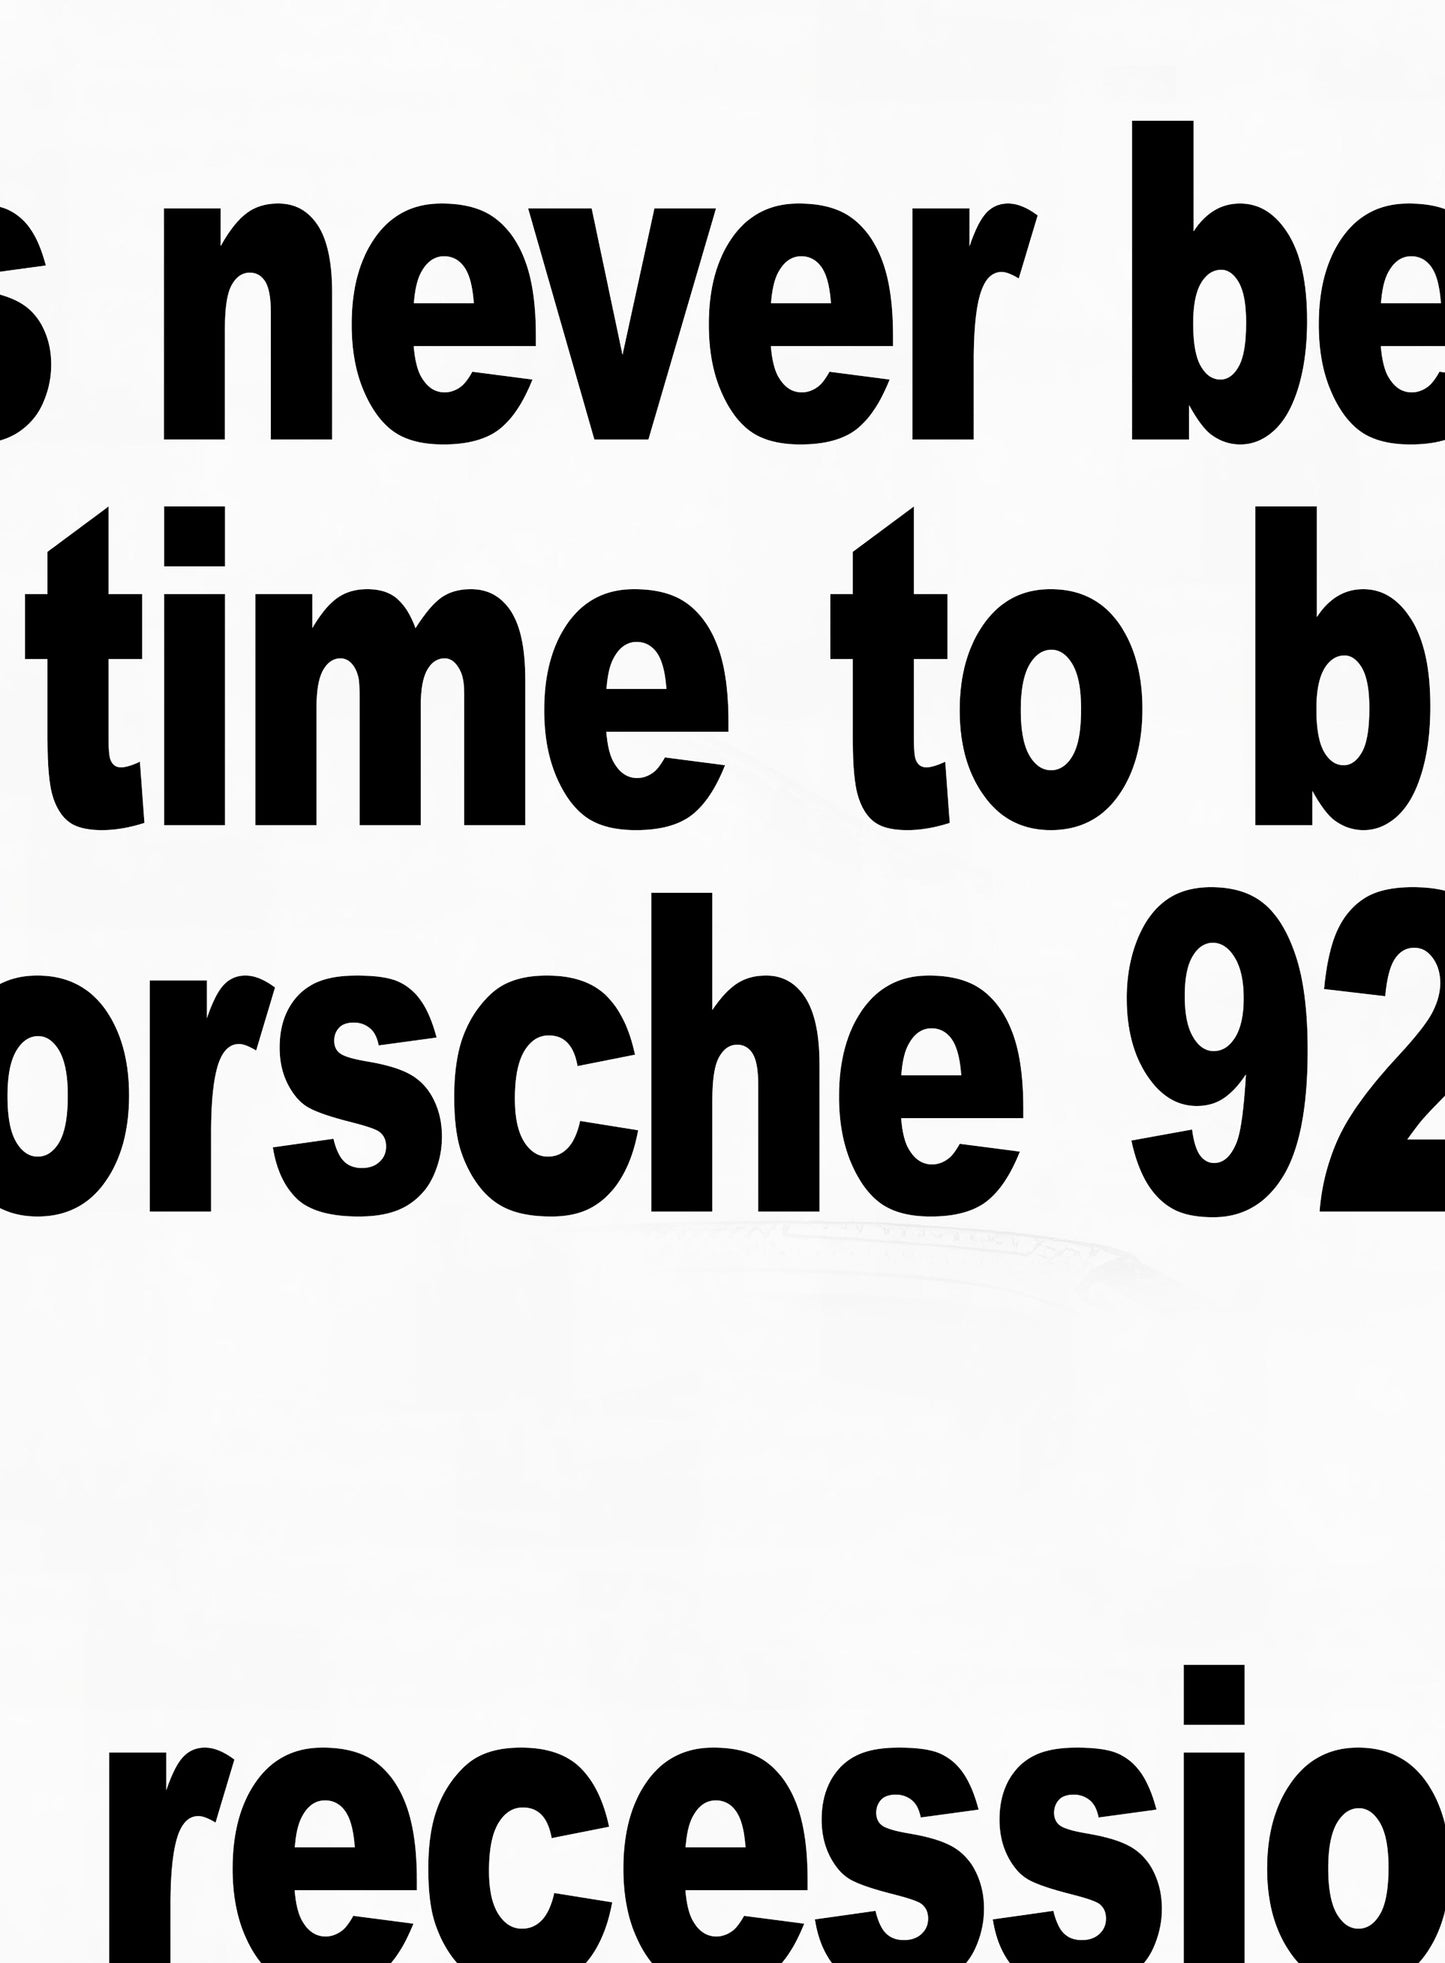 Porsche "There's Never Been A Better Time To Buy A New Porsche" Poster